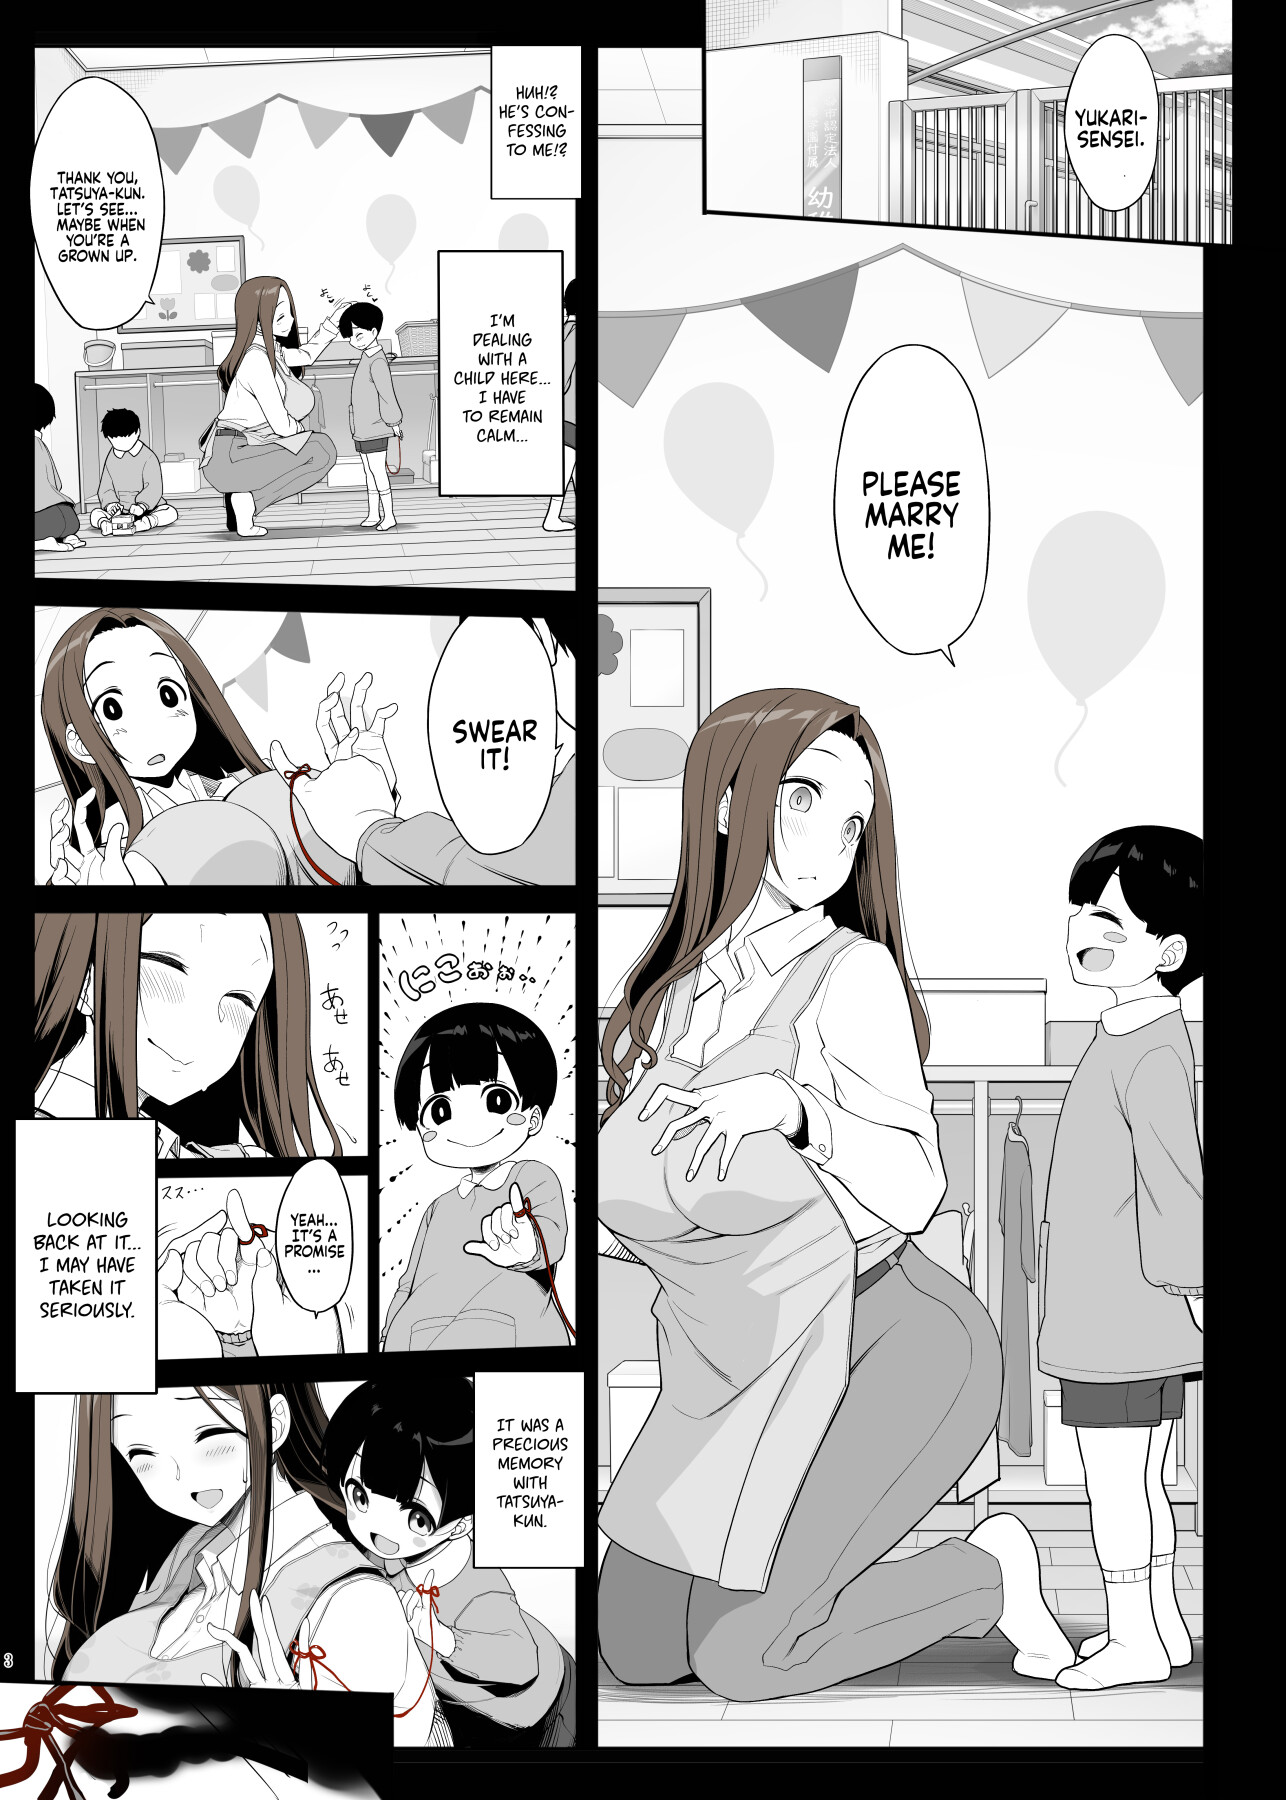 Hentai Manga Comic-After Reuniting with the Onee-san Who is Fixated on Me, I was Proposed to with Sex and Got Addicted-Read-3